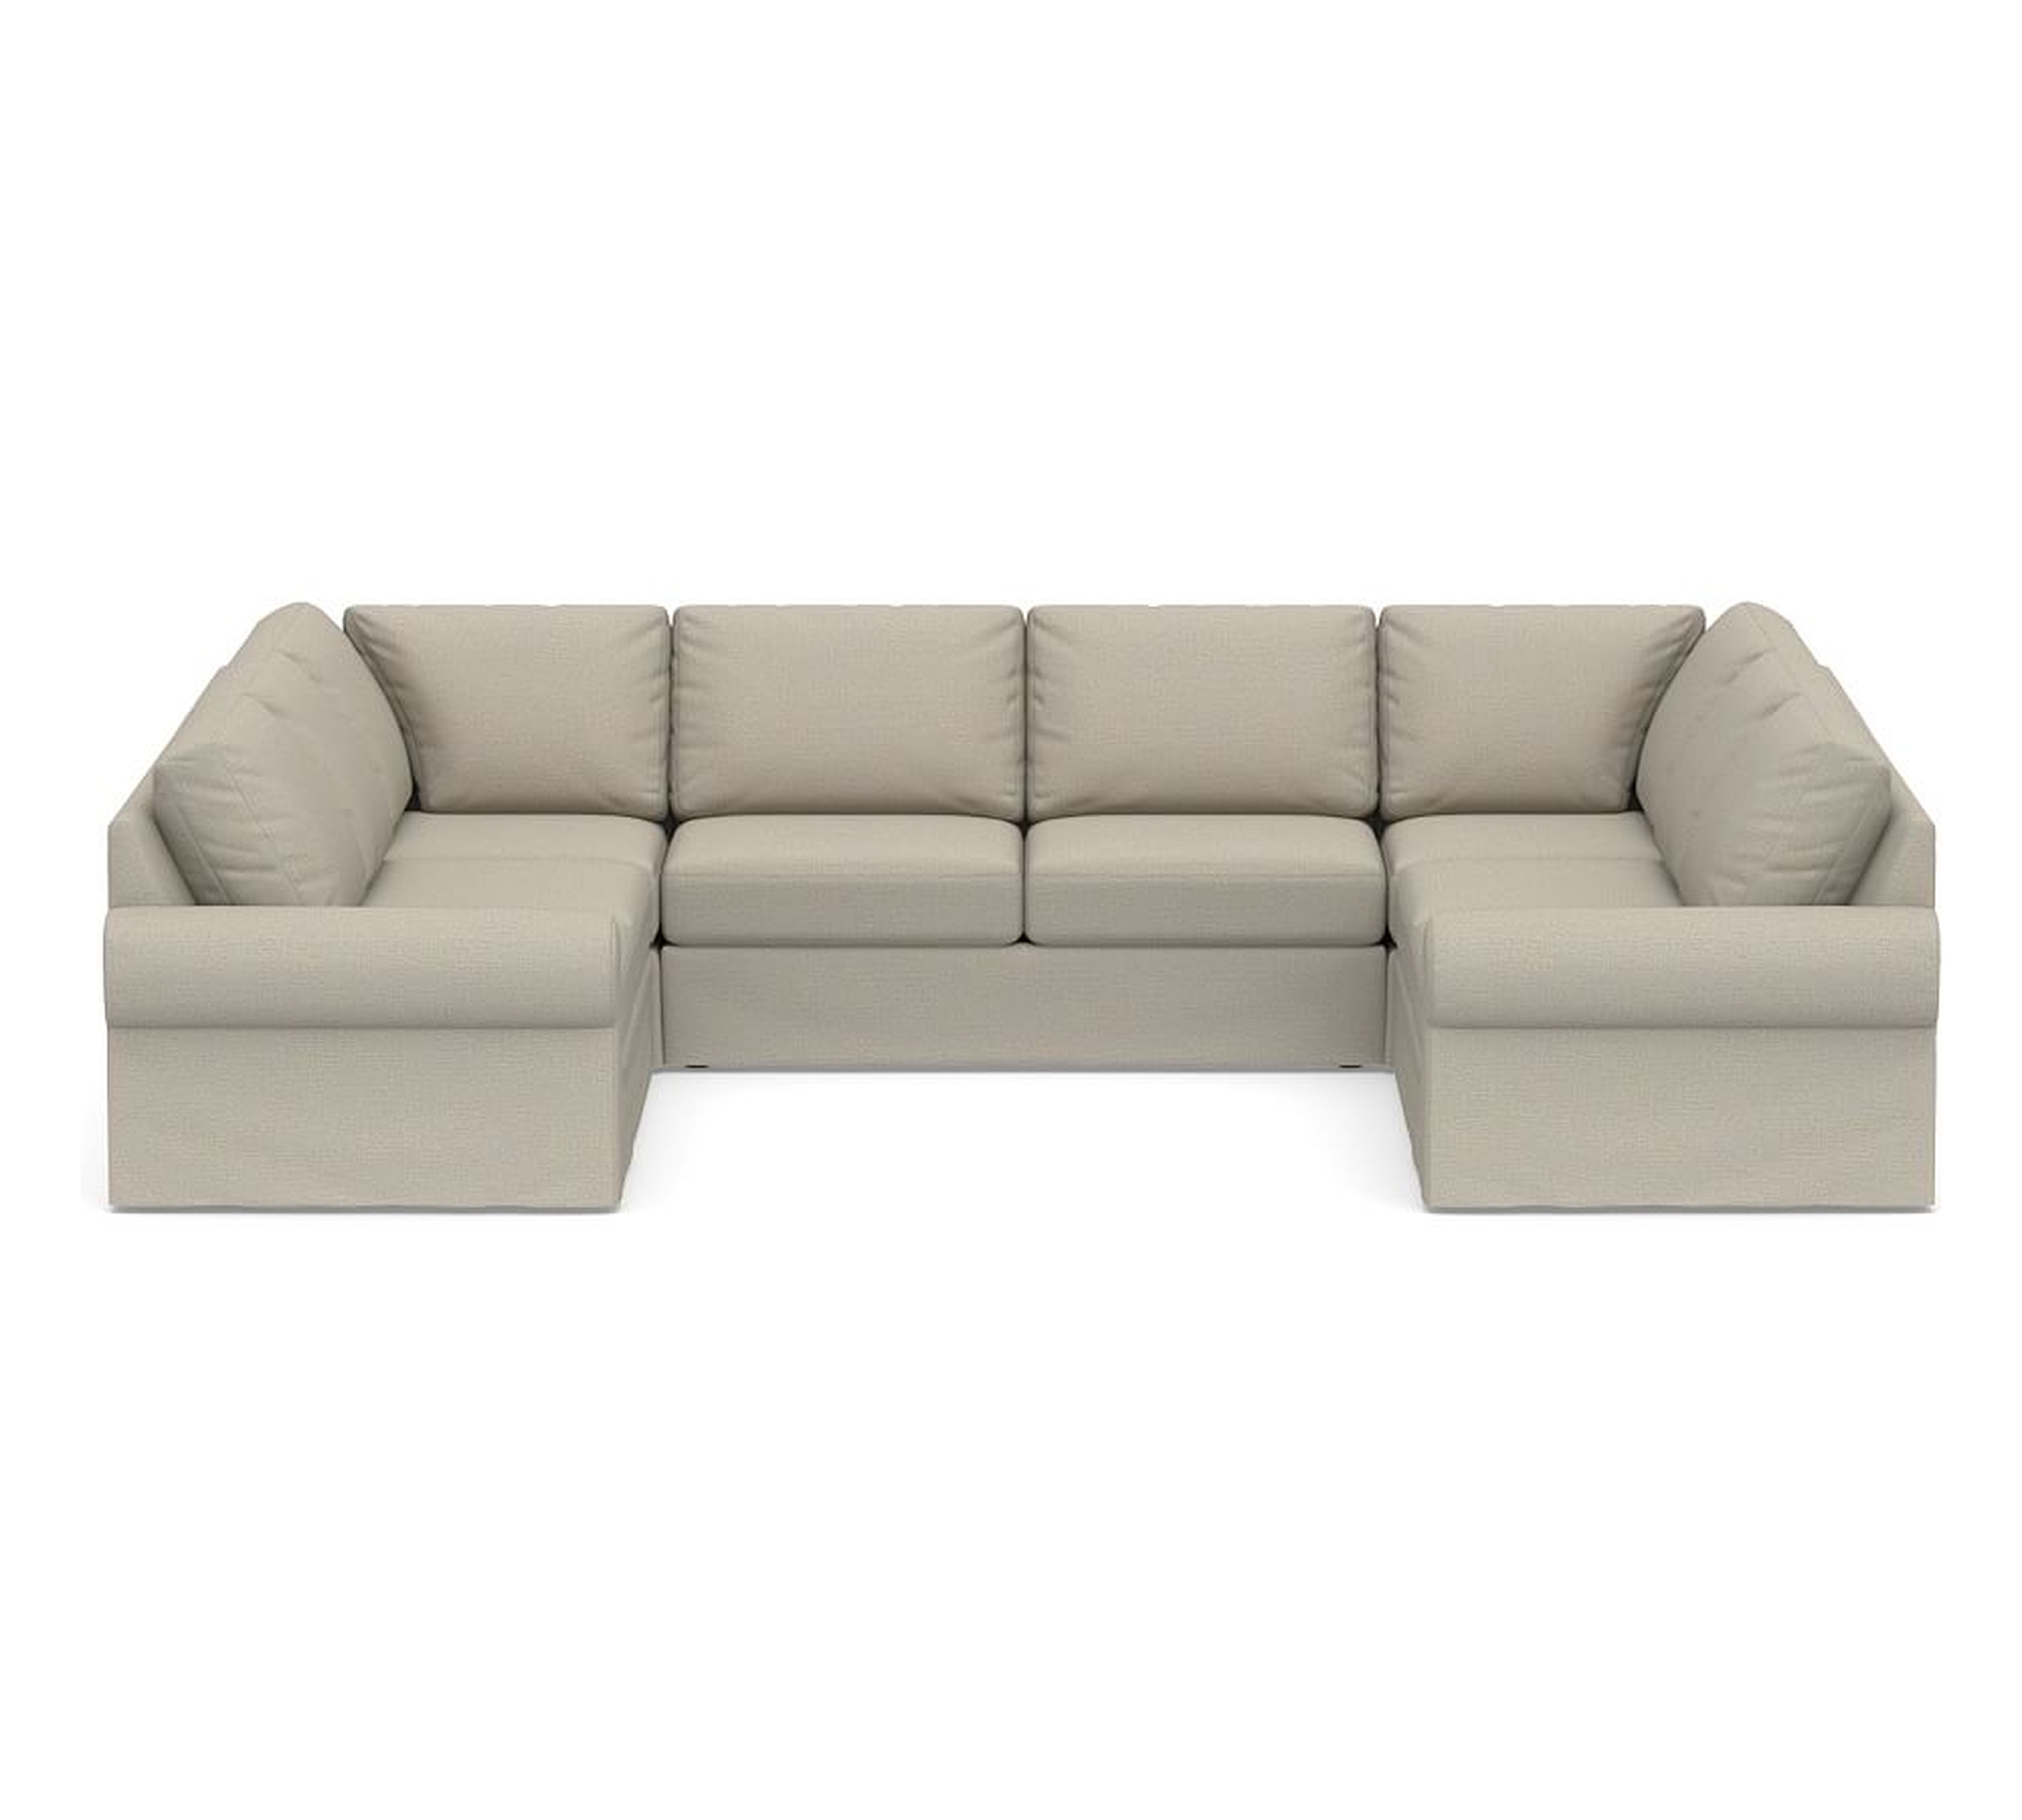 Big Sur Roll Arm Slipcovered U-Loveseat Sectional, Down Blend Wrapped Cushions, Performance Boucle Fog - Pottery Barn